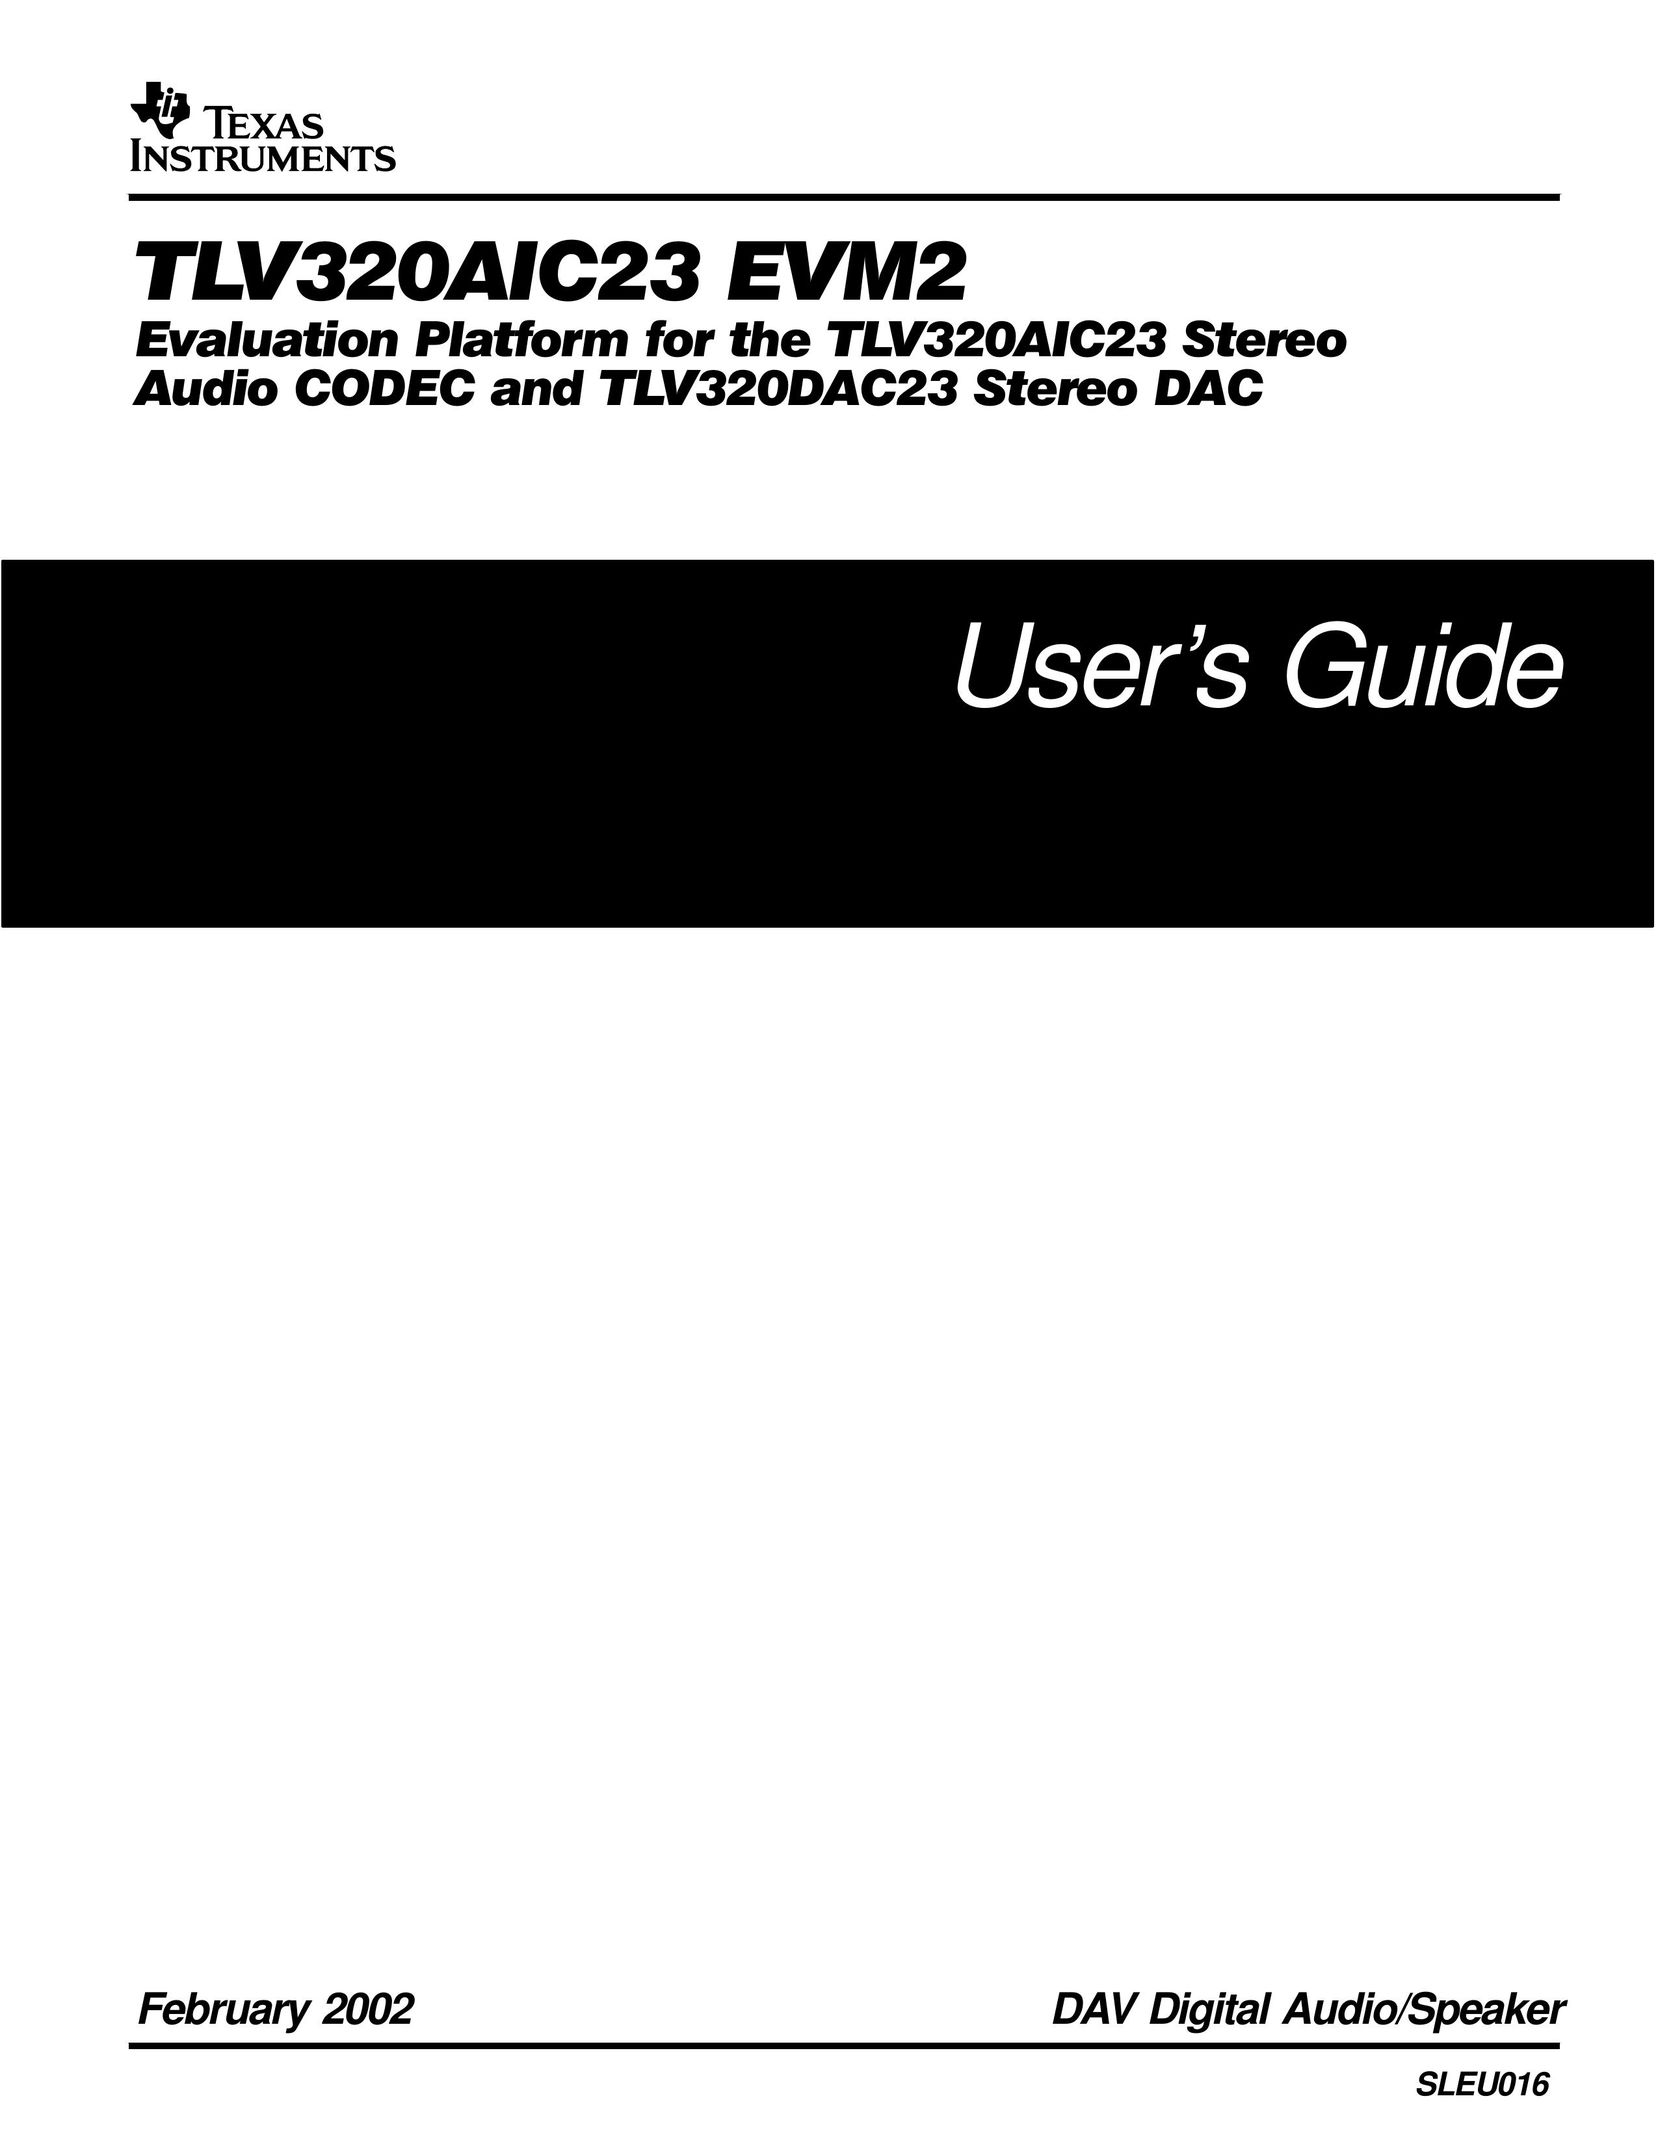 Texas Instruments TLV320AIC23 Conference Phone User Manual